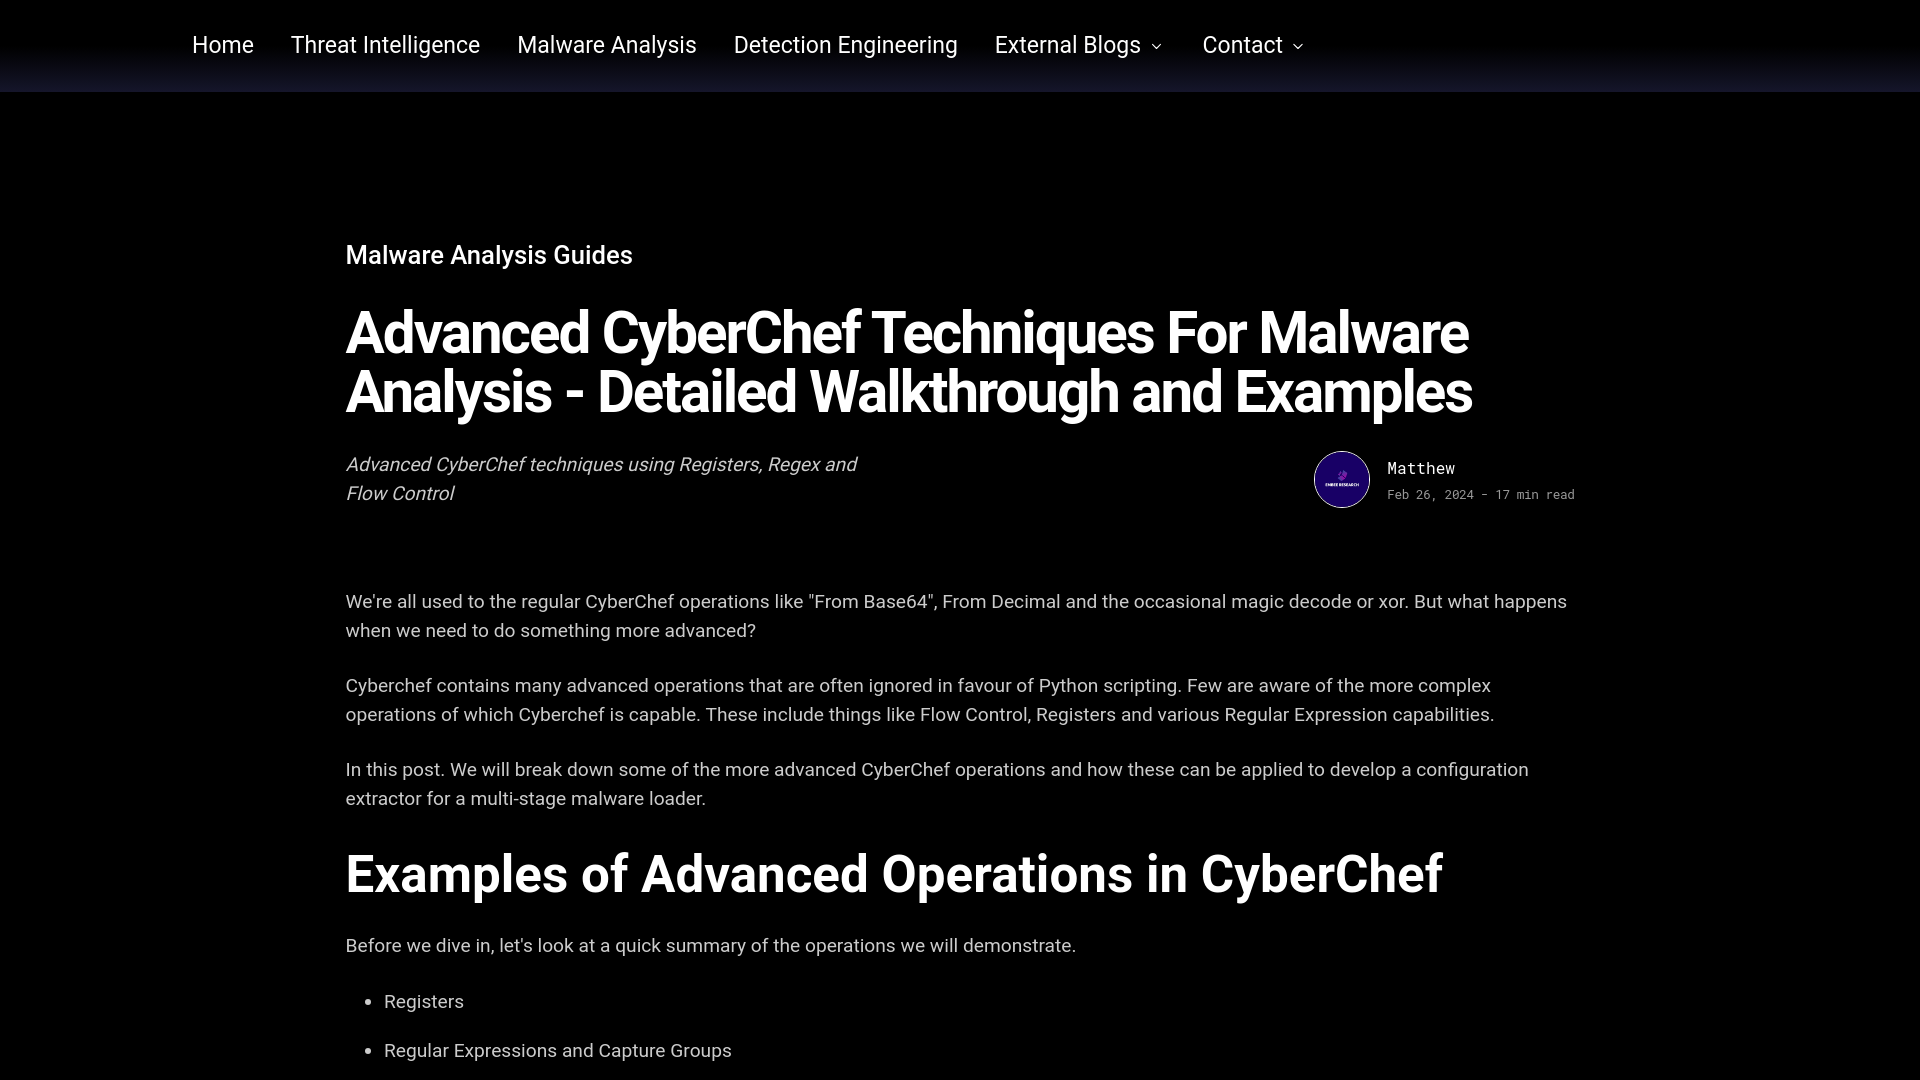 Advanced CyberChef Techniques For Malware Analysis - Detailed Walkthrough and Examples